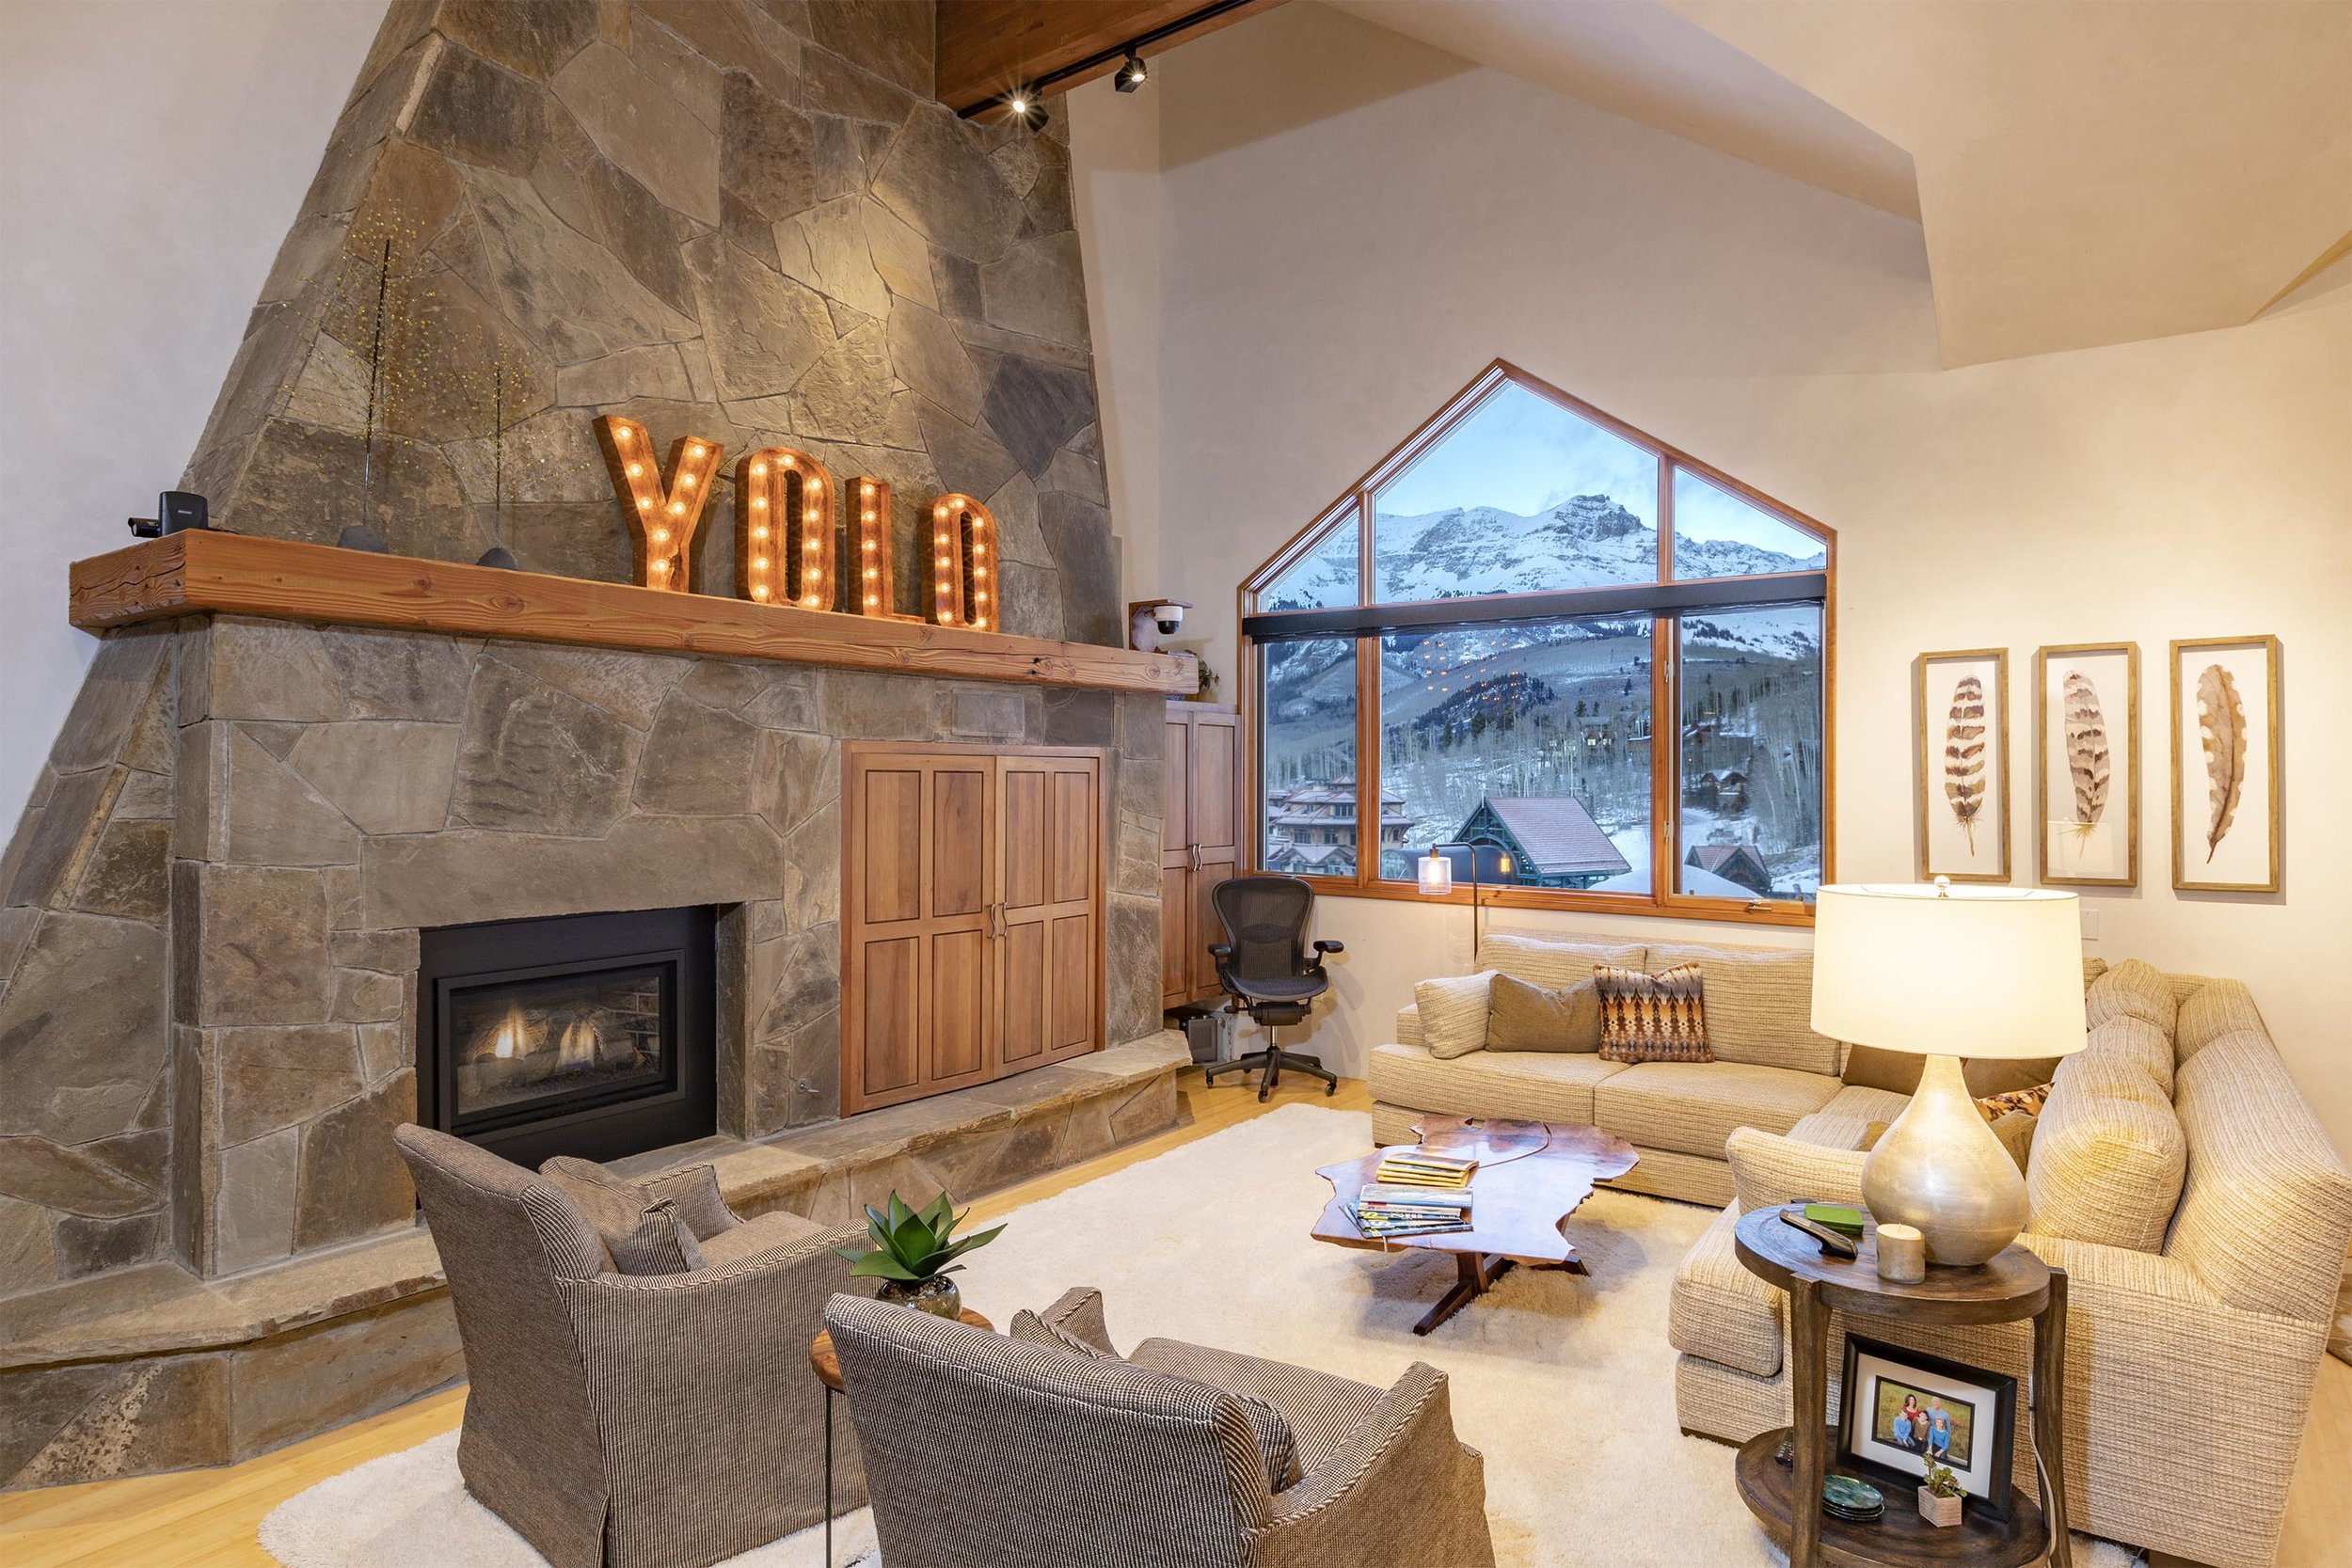  INVEST IN YOUR LIFESTYLE TELLURIDE, CO   SEARCH FOR YOUR DREAM PROPERTY  